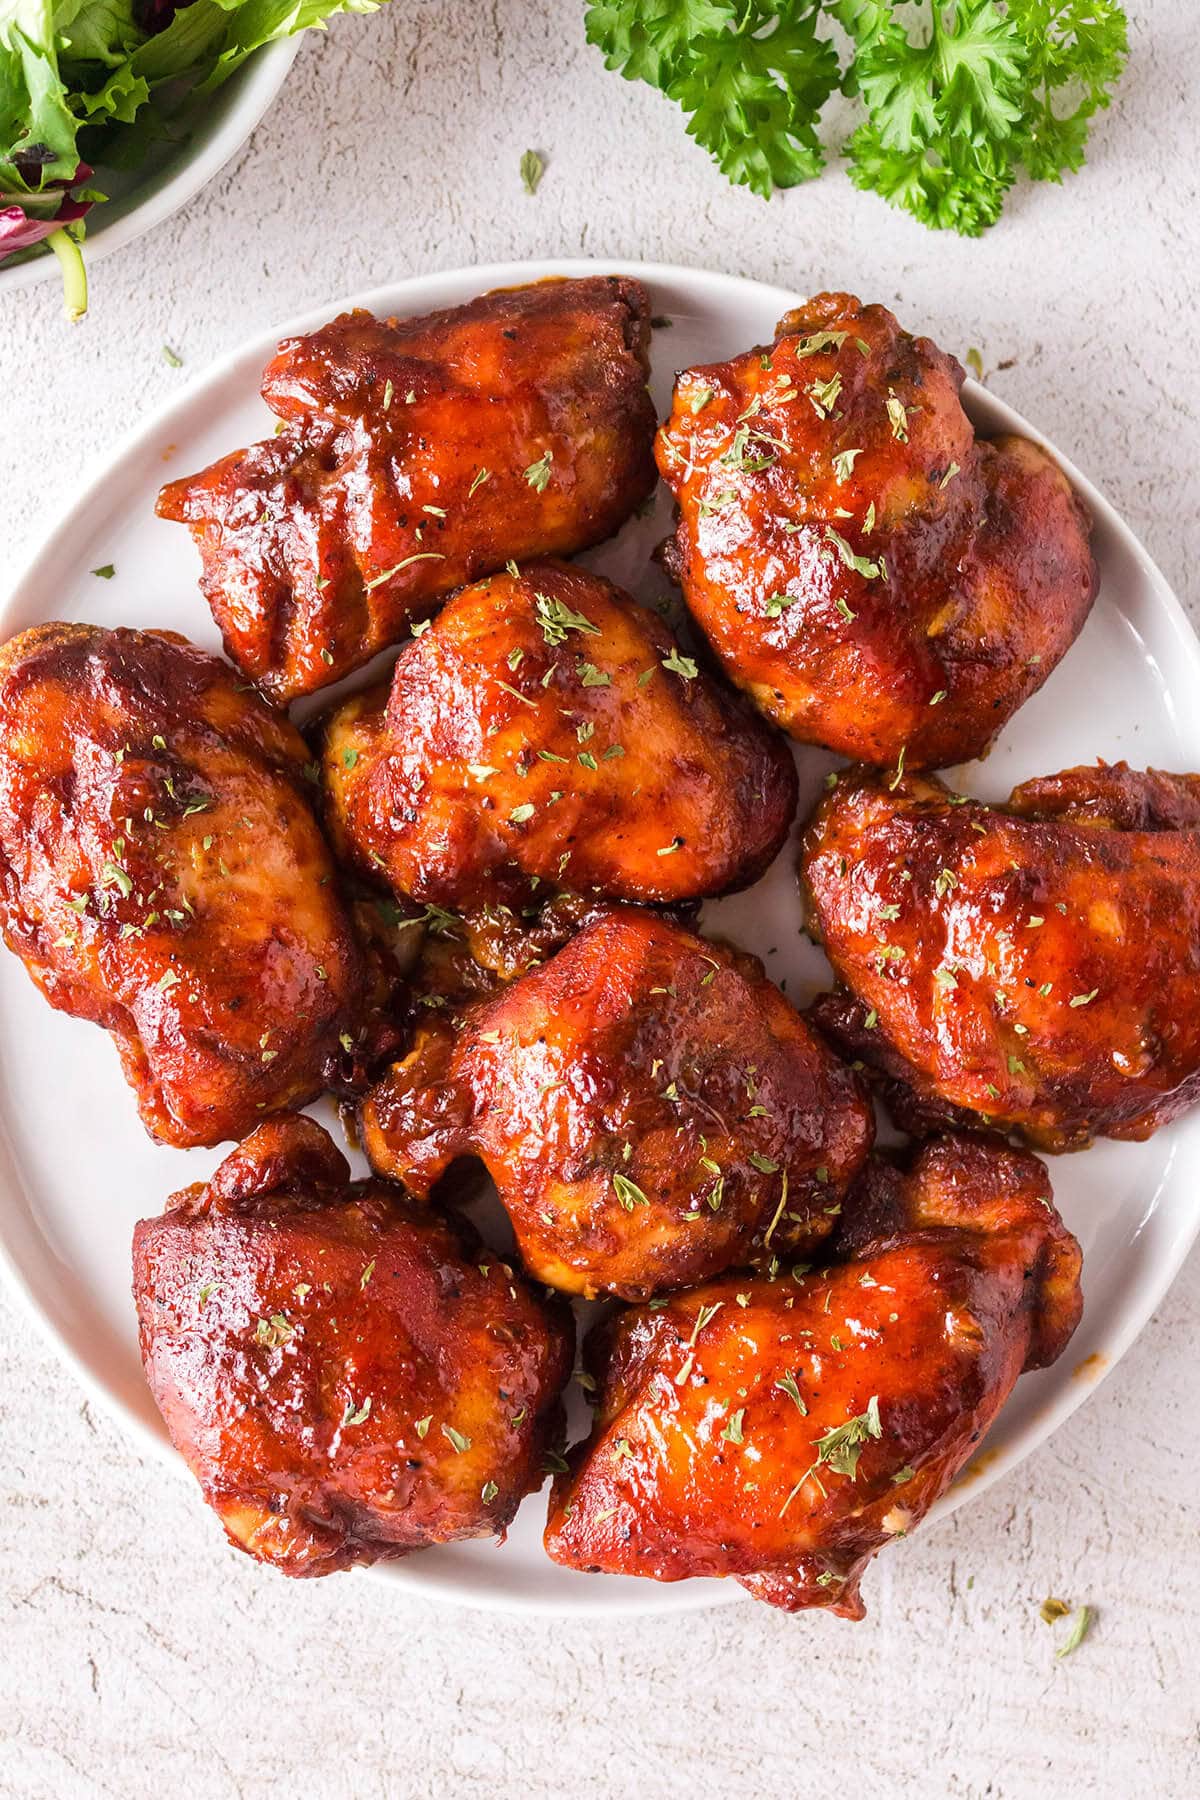 A platter filled with baked bbq chicken thighs.